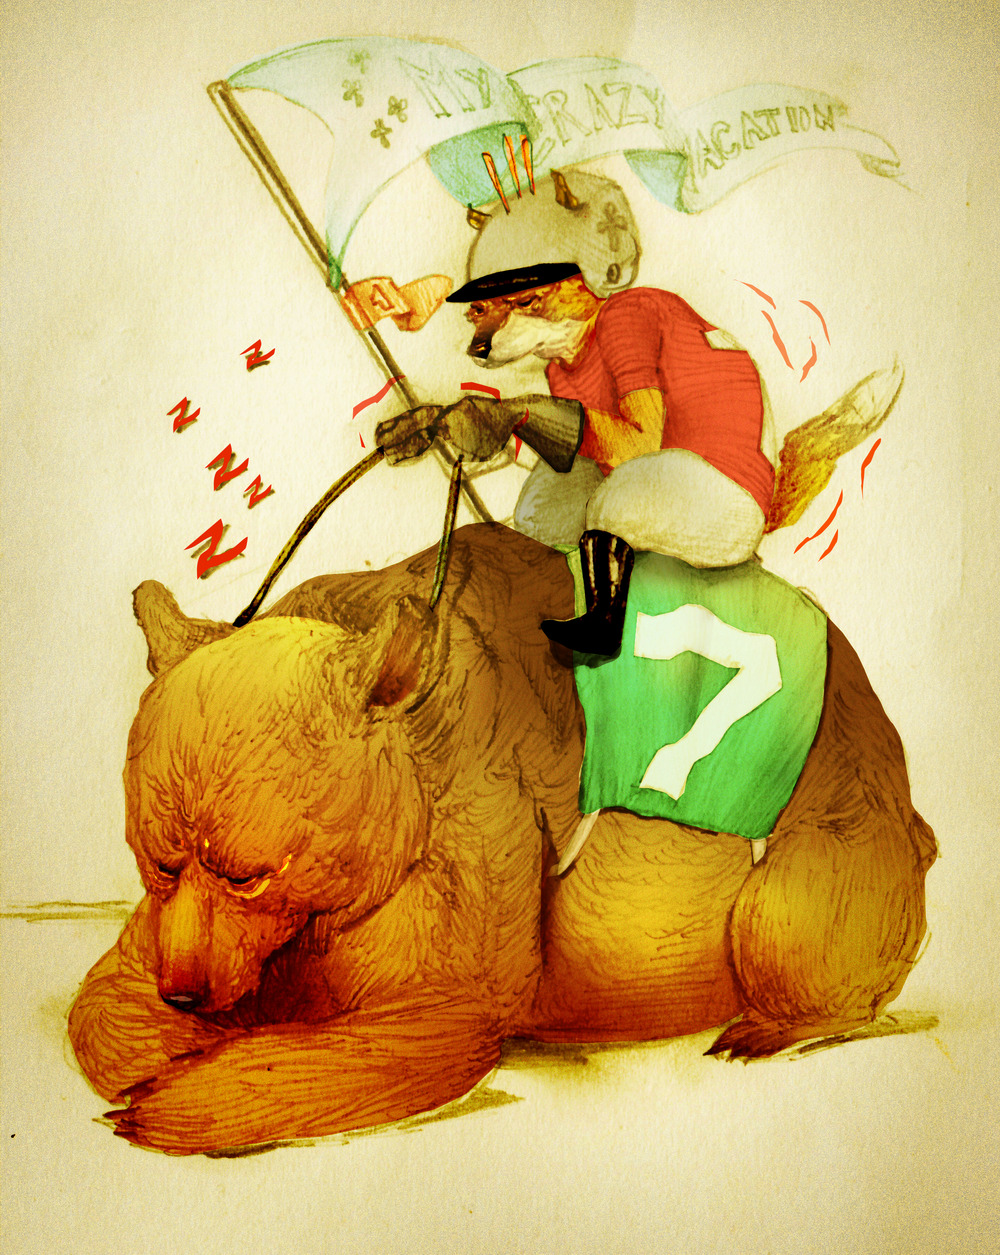  ” The Tale of the fox and the lazy bear ” graphite and digital 2013 15x21 cm Andrei Nicolescu Blog 